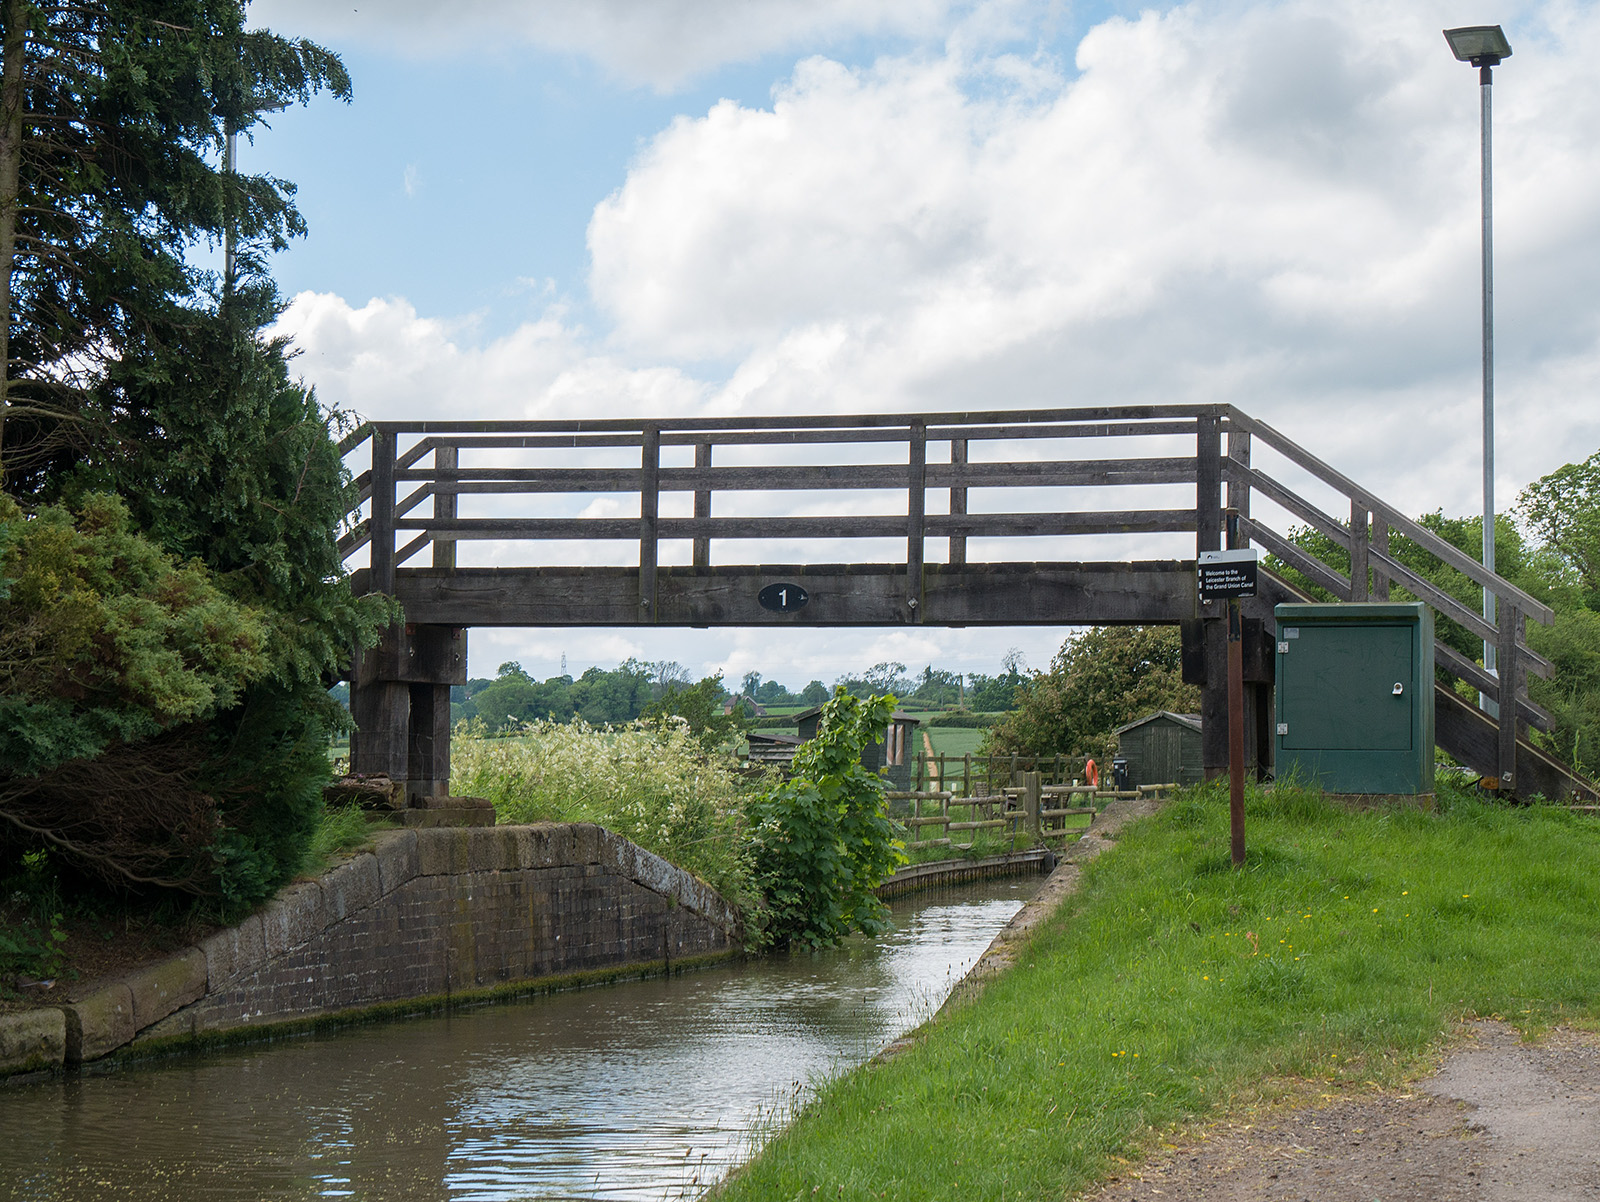 No, not bridge 1 on the Grand Union Canal, but the first bridge on the Leicester canal